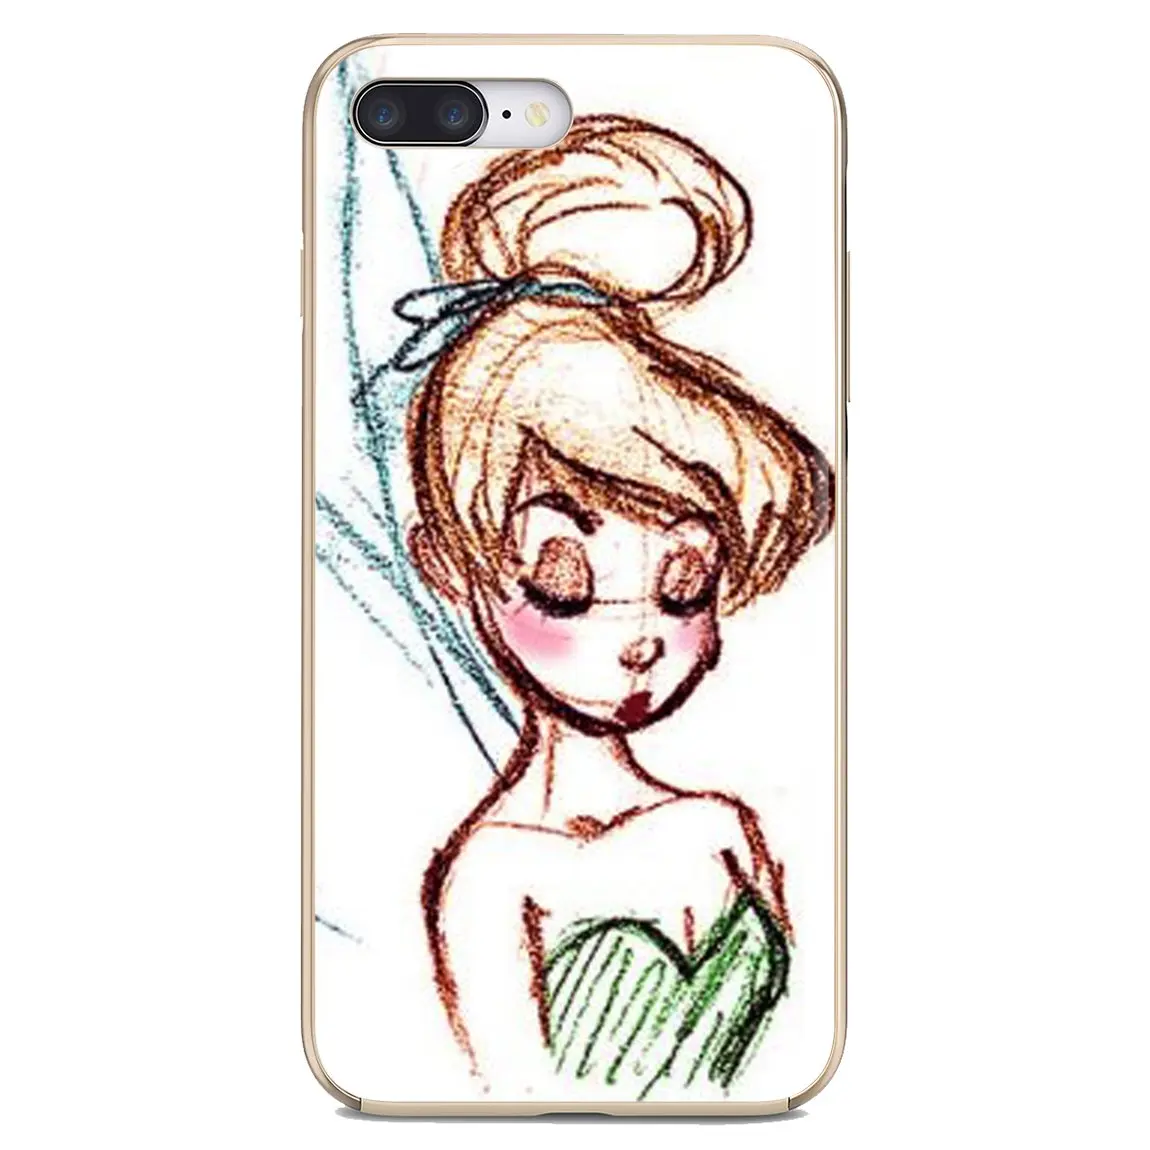 Fairy Tale Tinker Bell Periwinkle Silicone Cover For Meizu M6 M5 M6S M5S M2 M3 M3S NOTE MX6 M6t 6 5 Pro Plus U20 